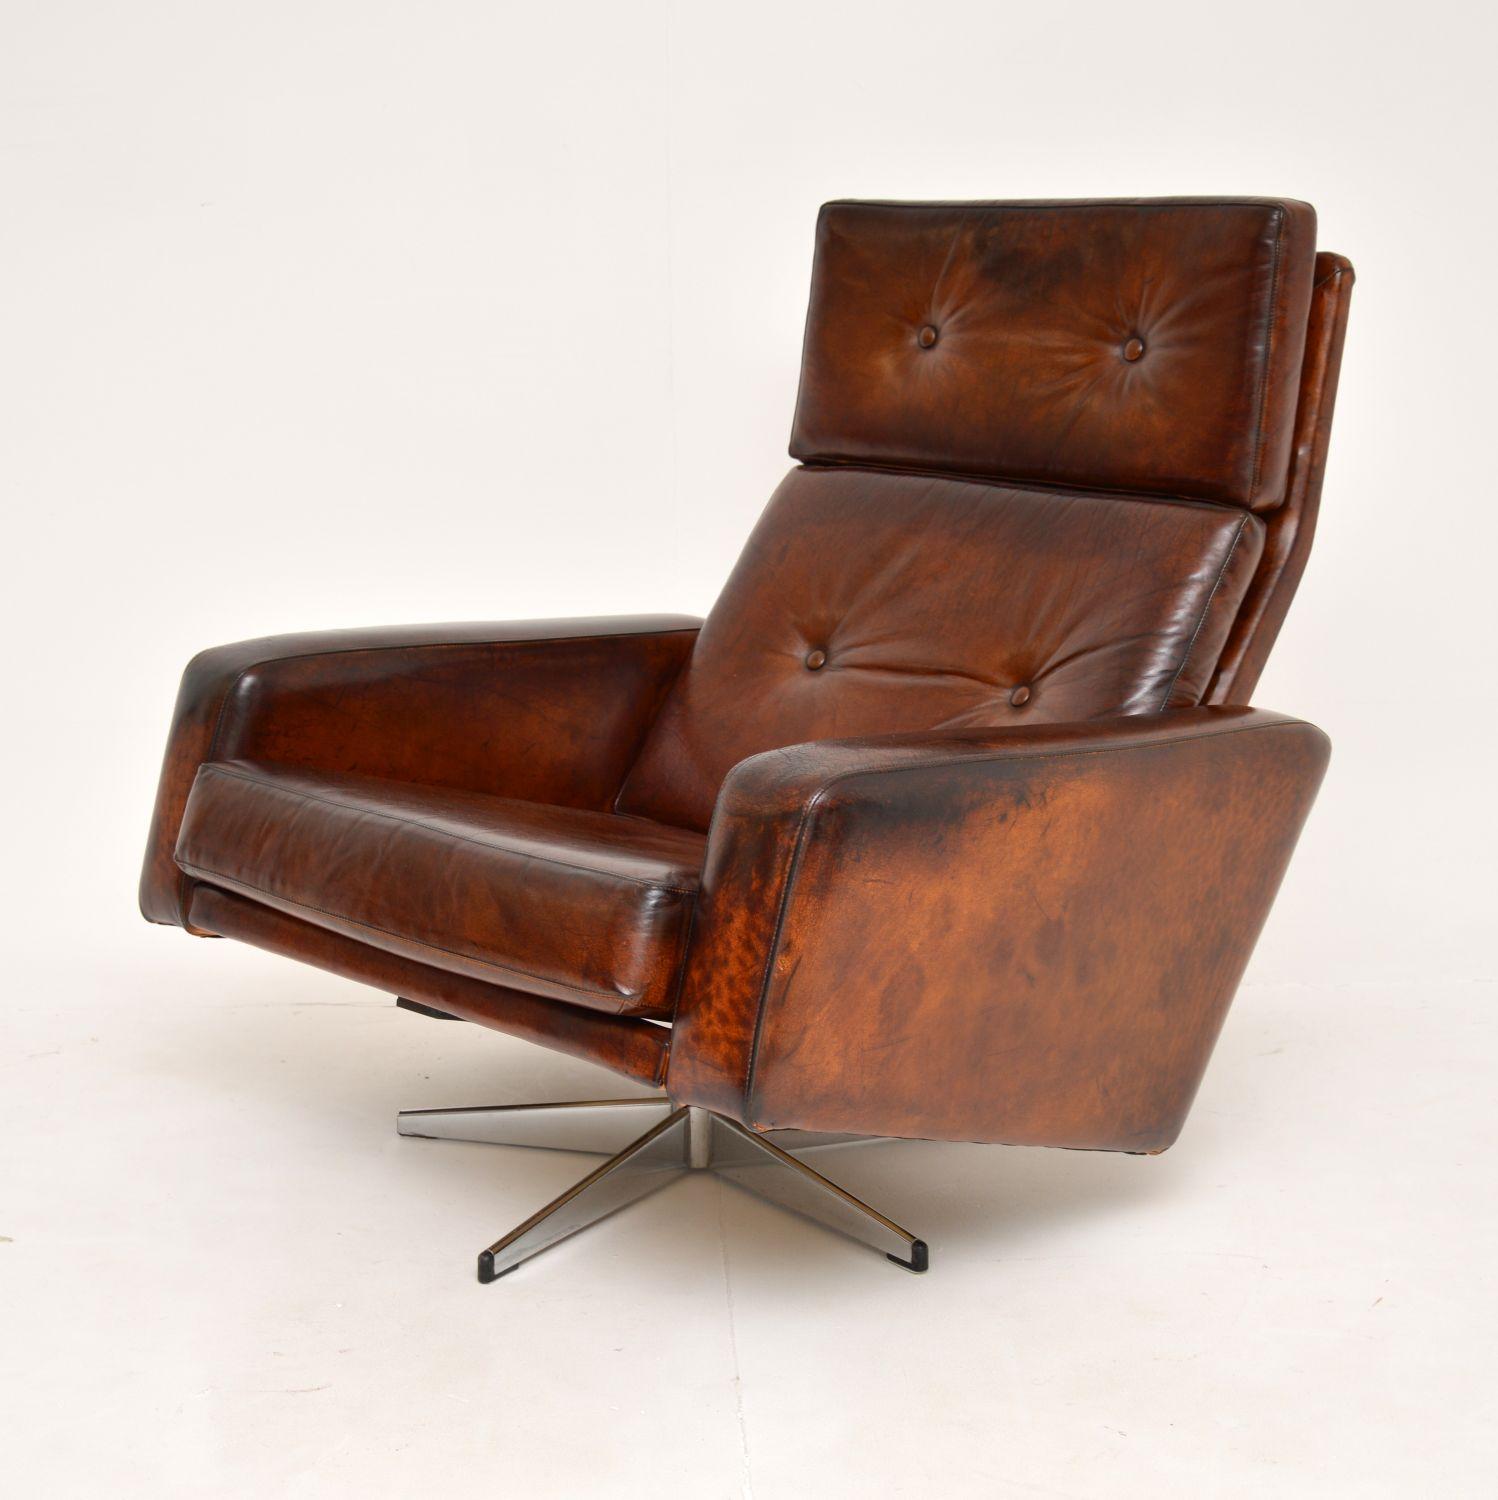 A superb and iconic design by Robin Day, this is the ‘Leo’ chair in brown leather and chrome. It was made by Hille in England, it dates from the 1960’s.

This is of amazing quality and is extremely comfortable. It has lovely proportions, with a